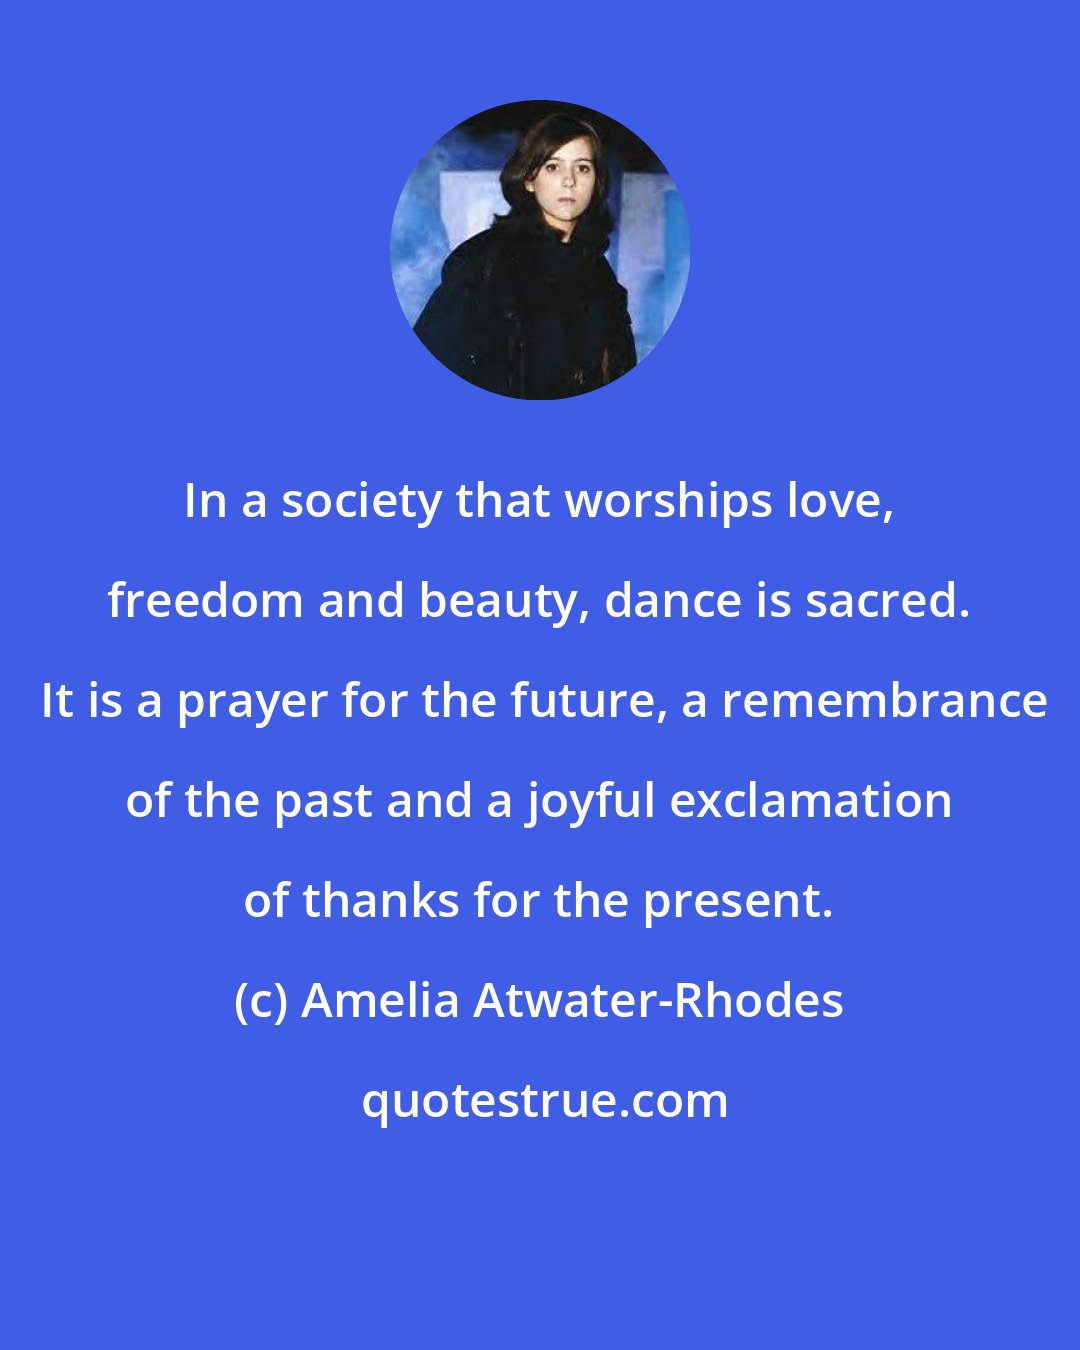 Amelia Atwater-Rhodes: In a society that worships love, freedom and beauty, dance is sacred.  It is a prayer for the future, a remembrance of the past and a joyful exclamation of thanks for the present.